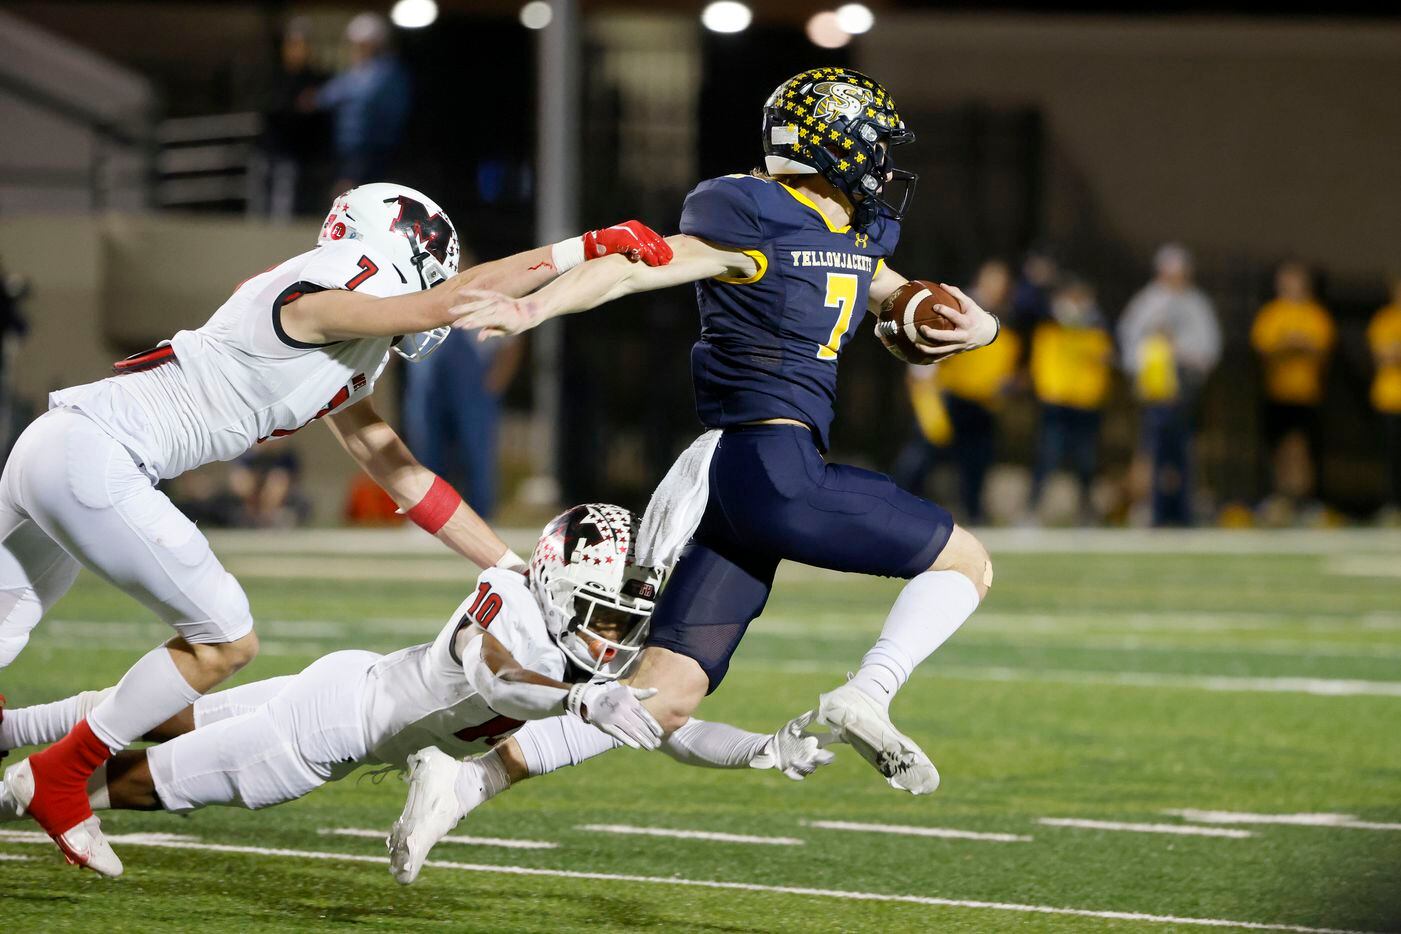 Melissa’s Gunnar Wilson (7) and Parrish Adger (10) tackle Stephenville quarterback Ryder Lambert (7) during the first half of a Class 4A Division I Region II final high school football game in Bedford, Texas on Friday, Dec. 3, 2021. (Michael Ainsworth/Special Contributor)